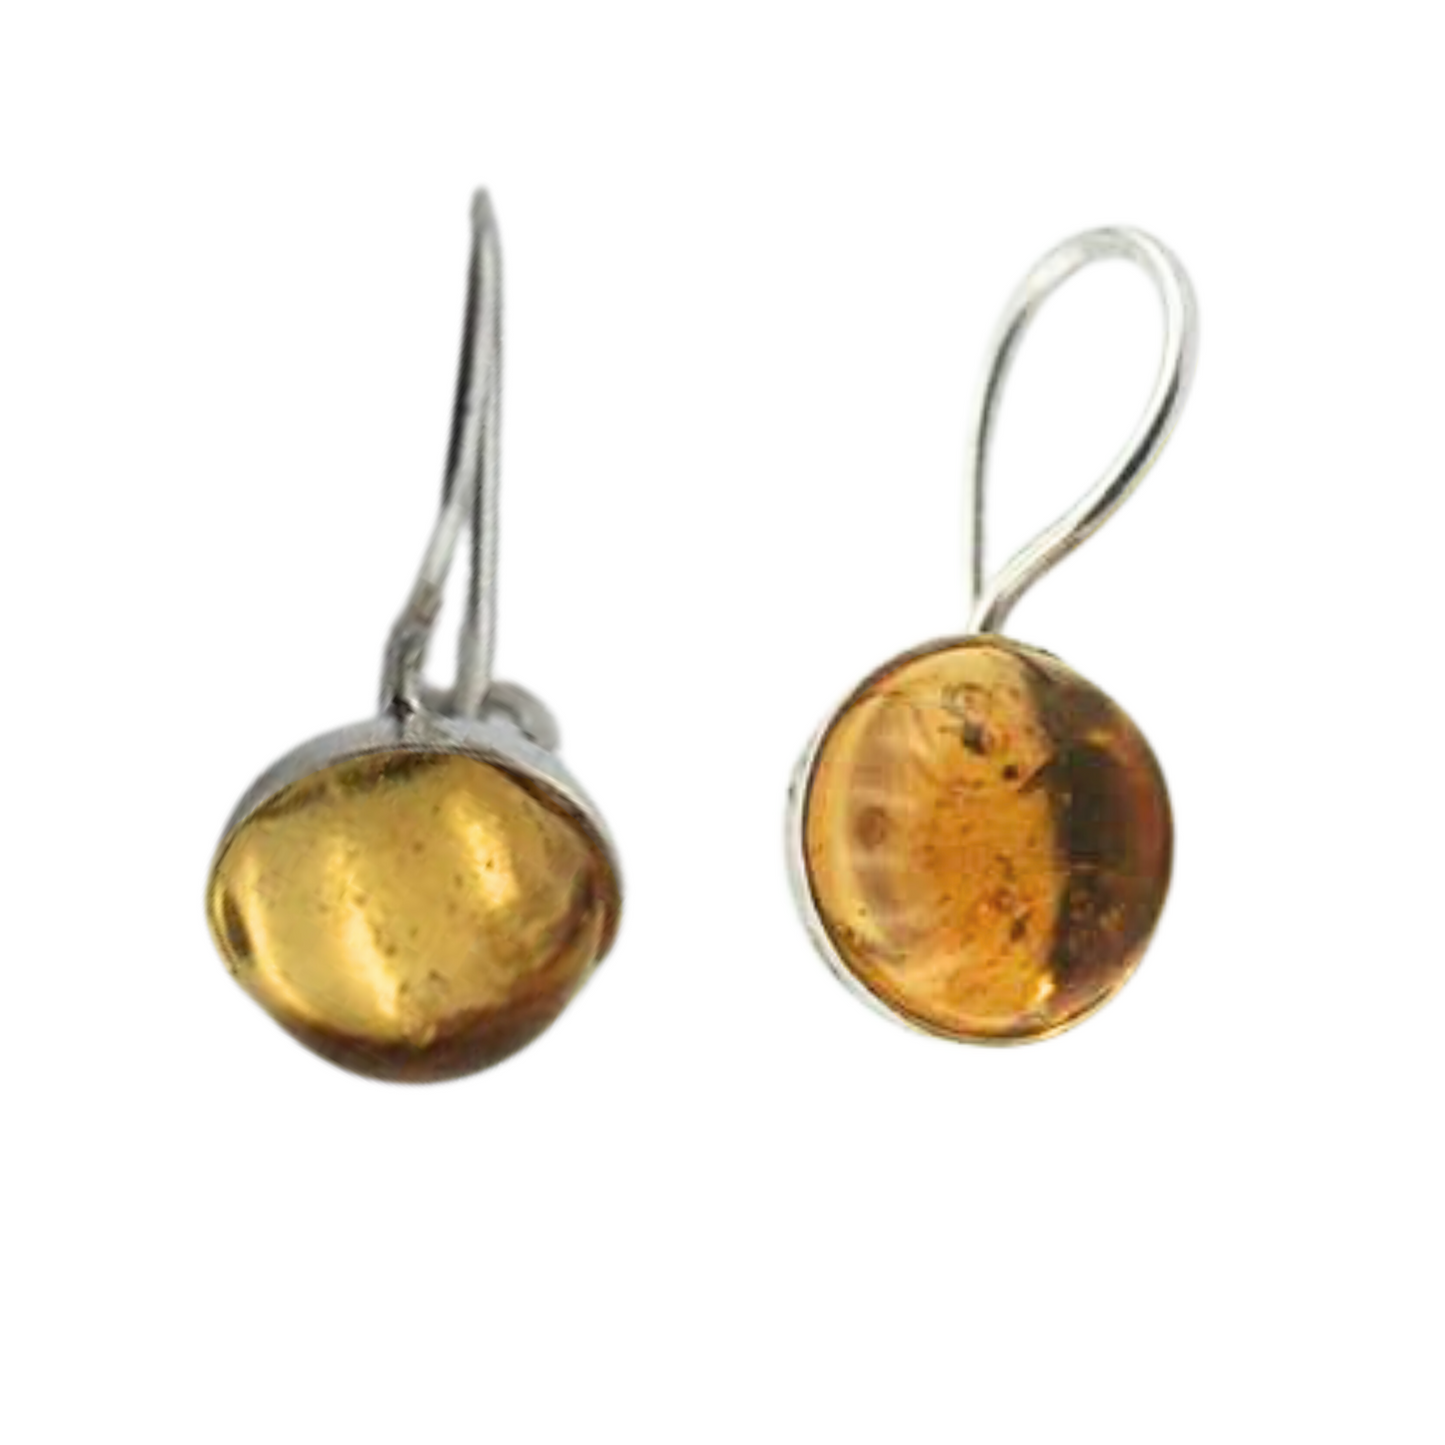 sterling silver Earrings with Natural Citrine Gemstones